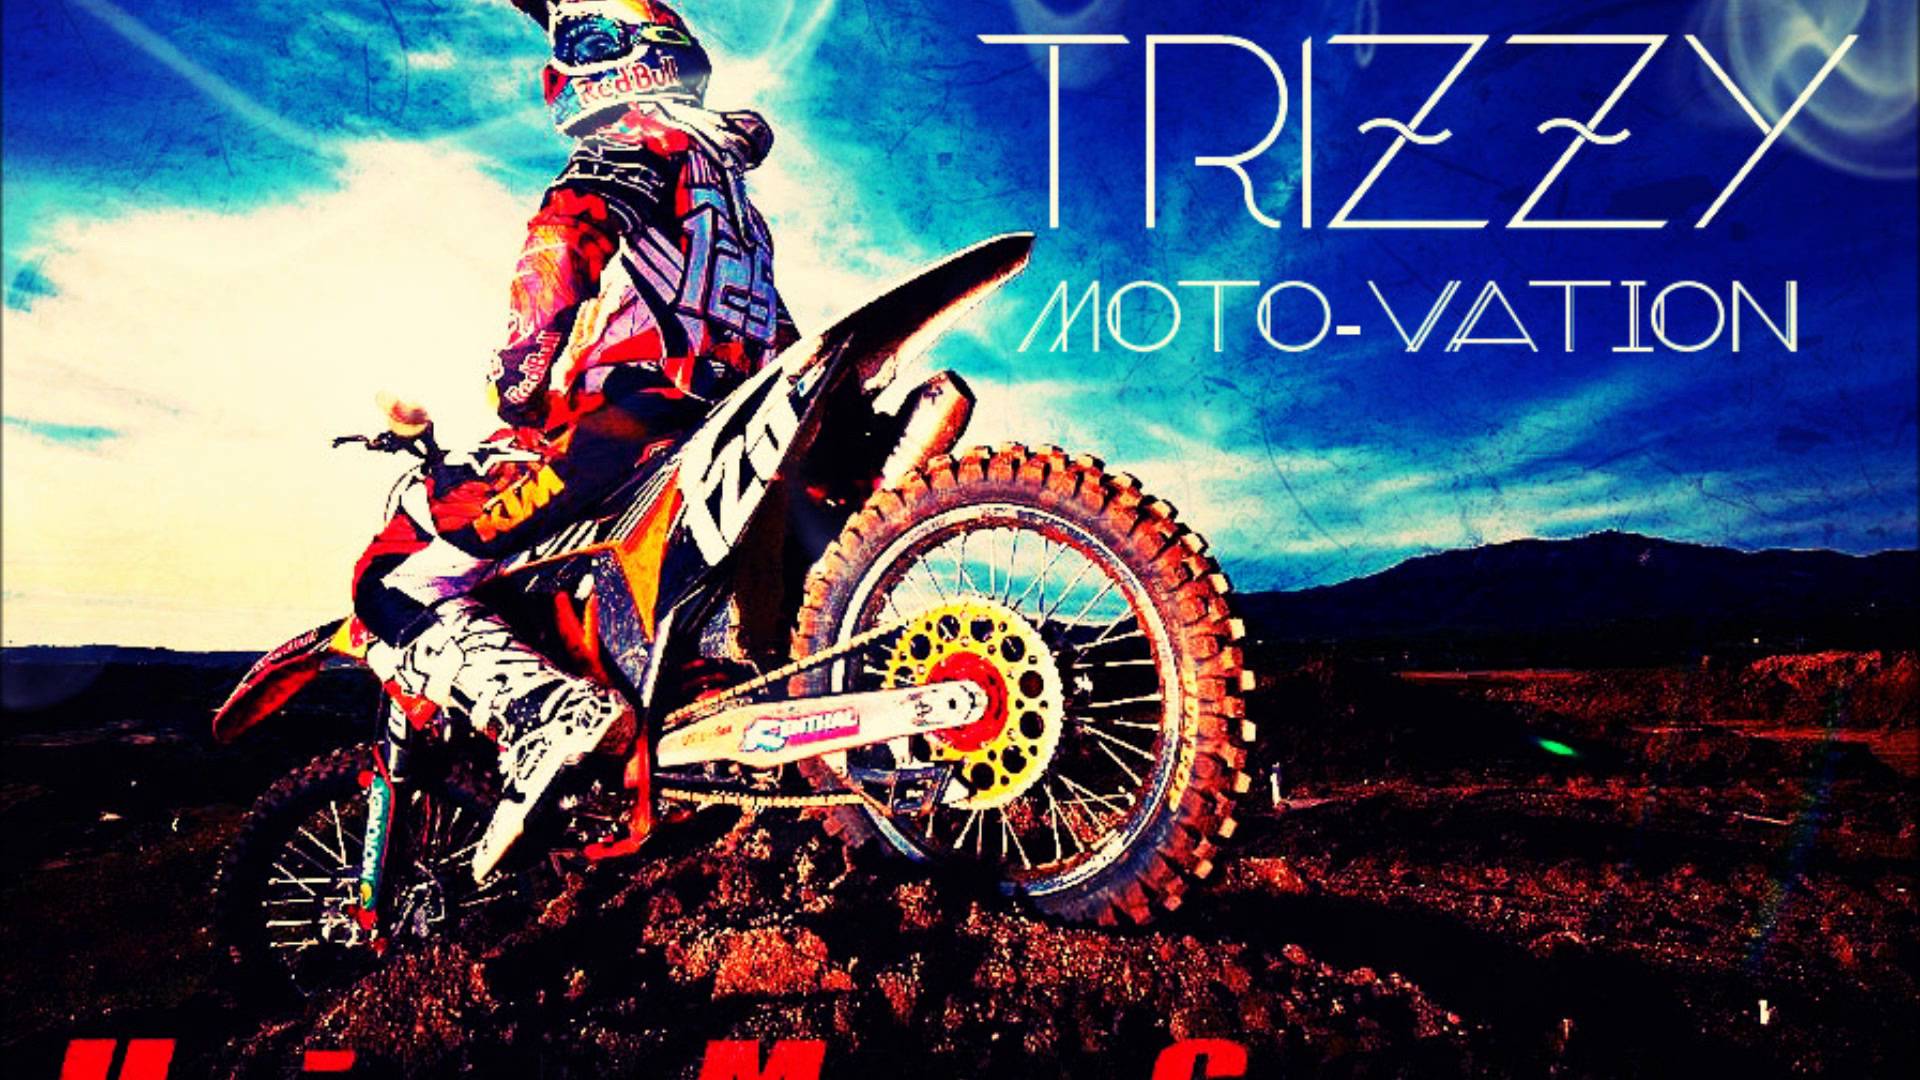 TRiZZY TRAE©-vation (Dirtbike song) @RMG